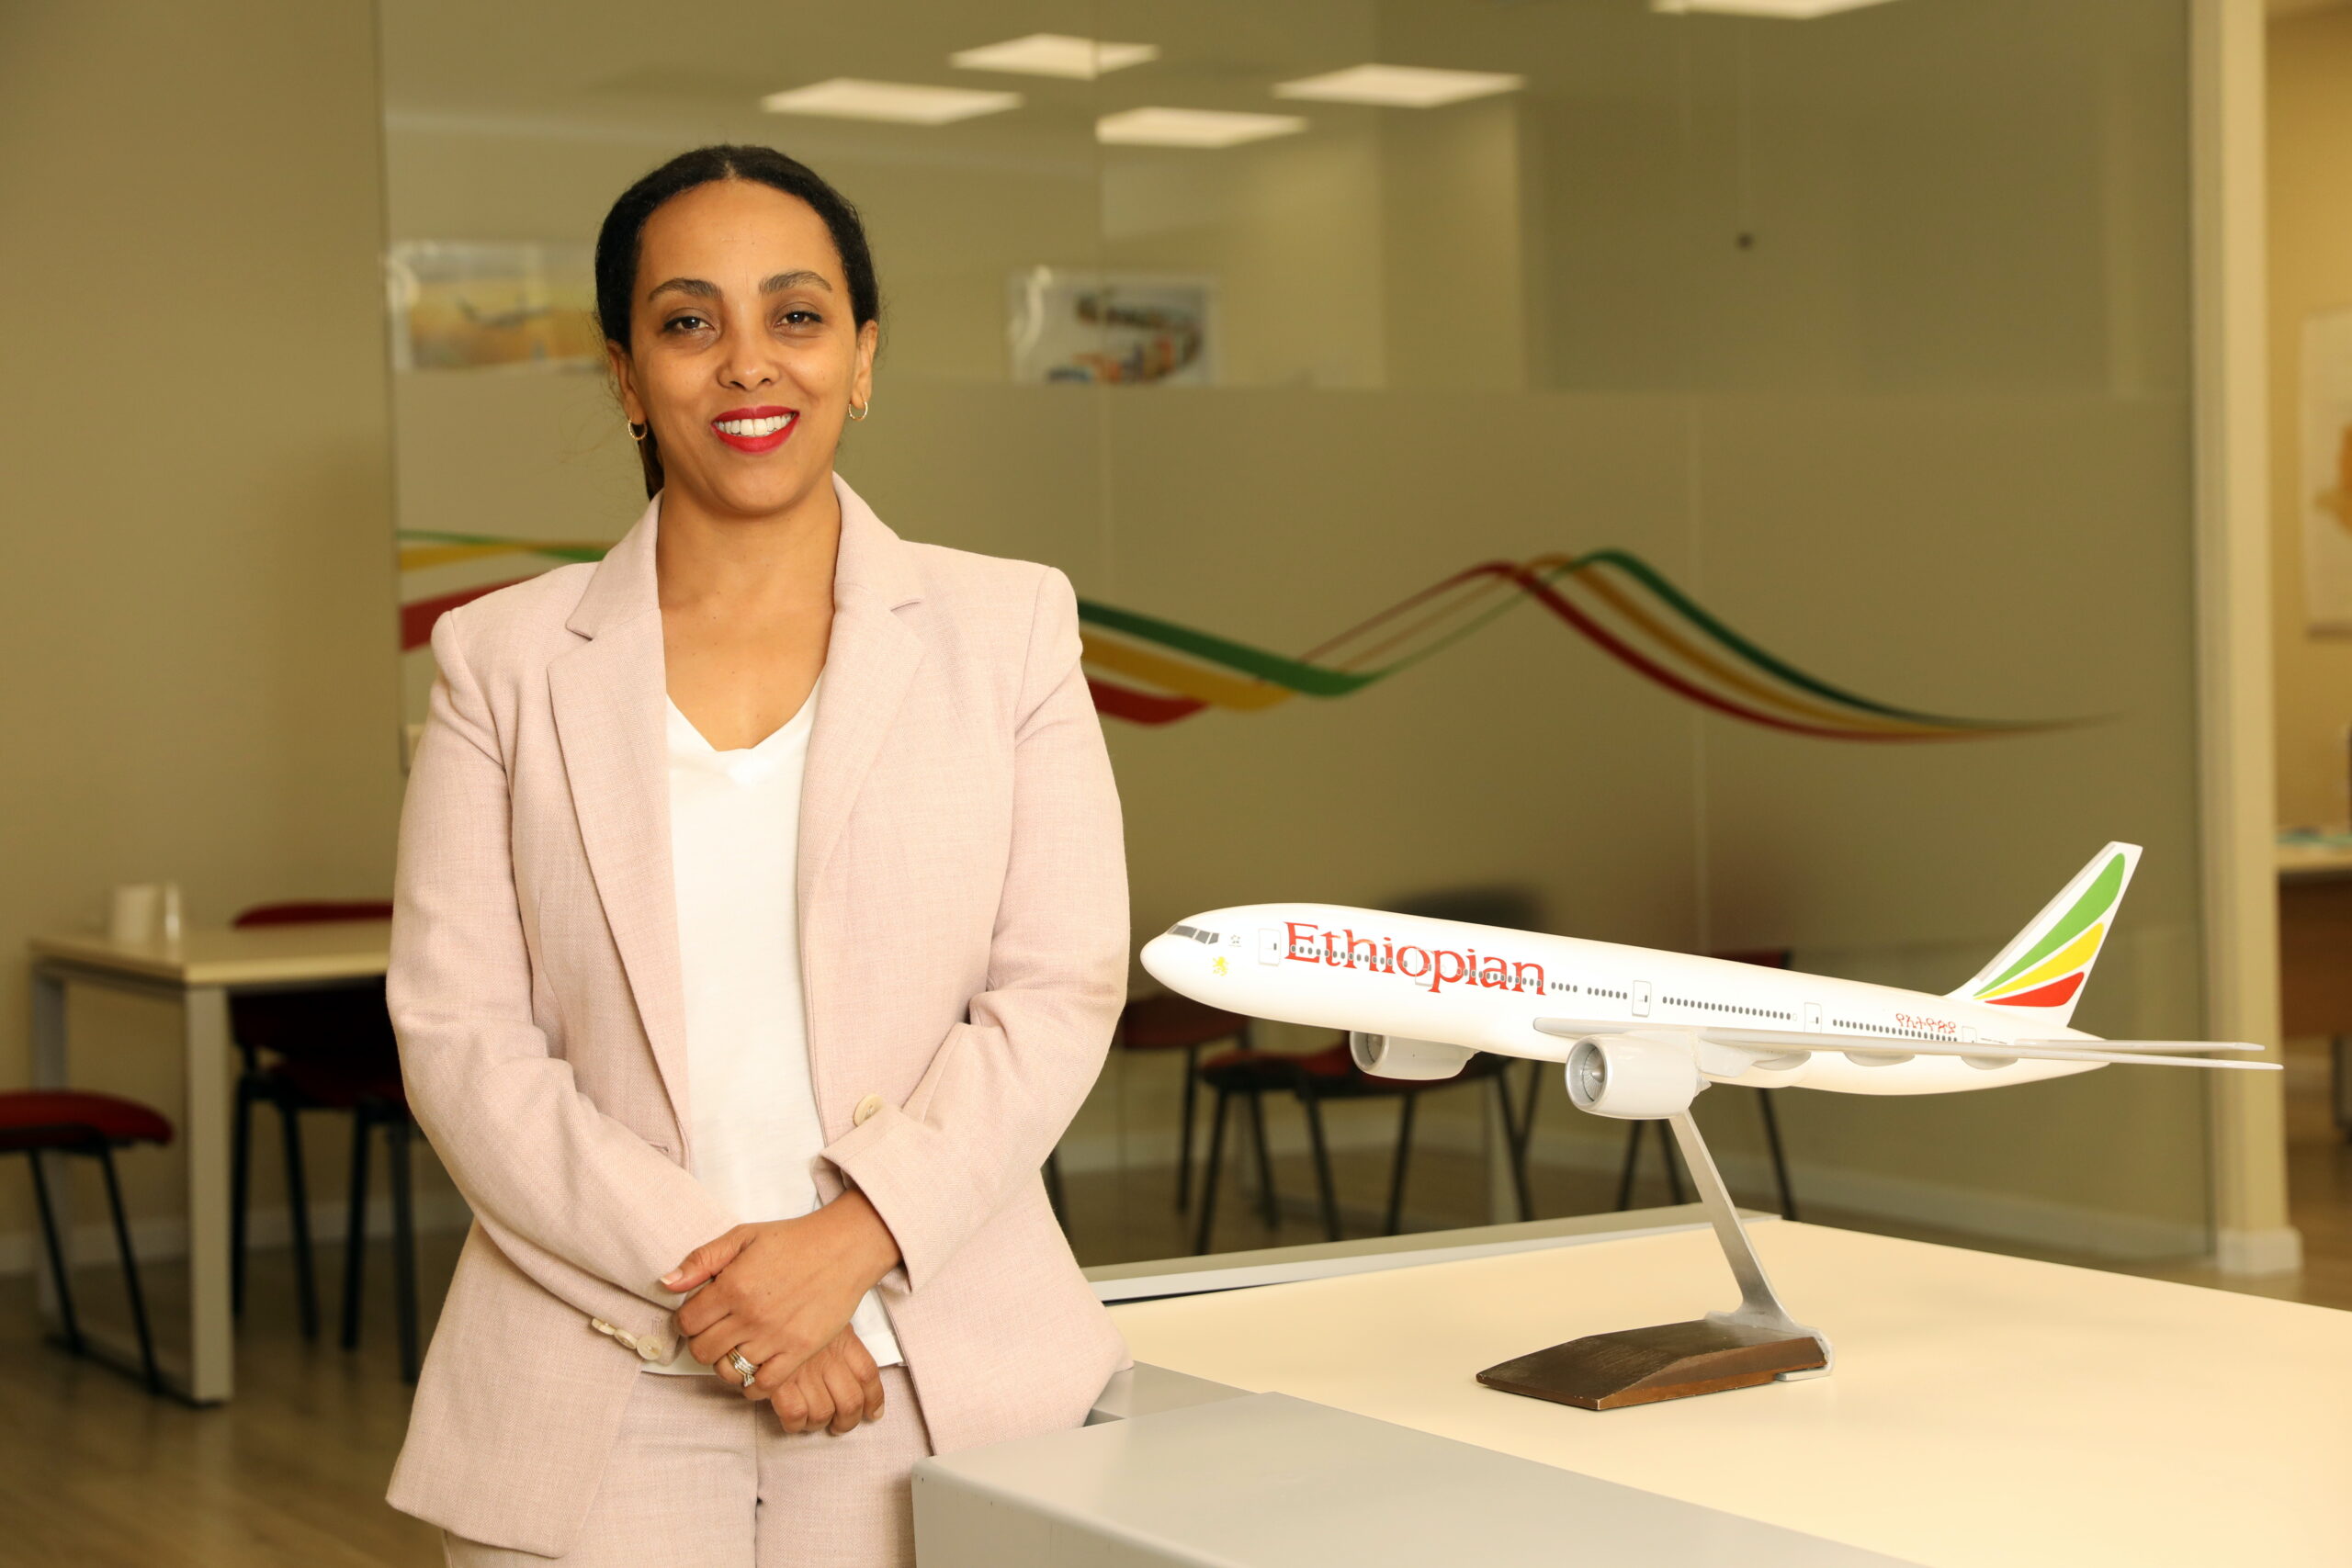 Bilen Arefaine to take over as Regional Director India Sub Continent for Ethiopian Airlines